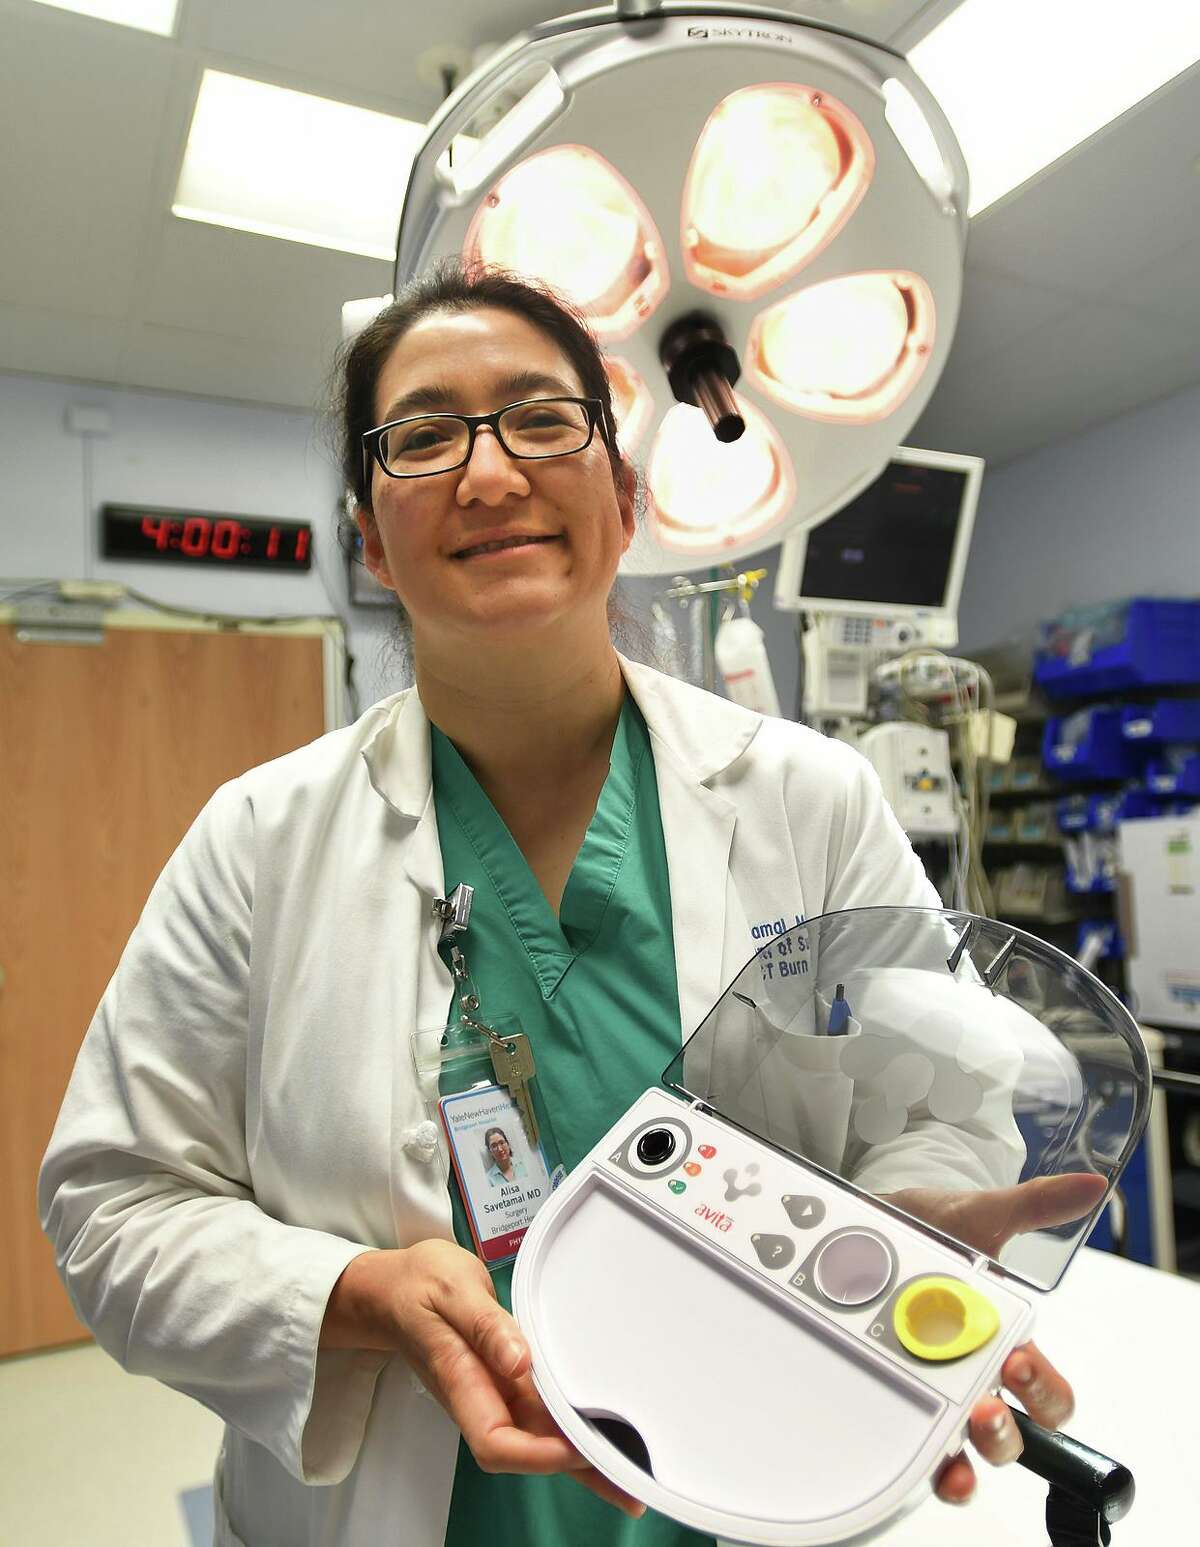 Dr. Alisa Savetamal, medical director of the Connecticut Burn Center, holds a RECELL kit, a system that creates spray on skin from a patient's own cells for use in burn treatment, at Bridgeport Hospital in Bridgeport, Conn. on Wednesday, July 24, 2019.